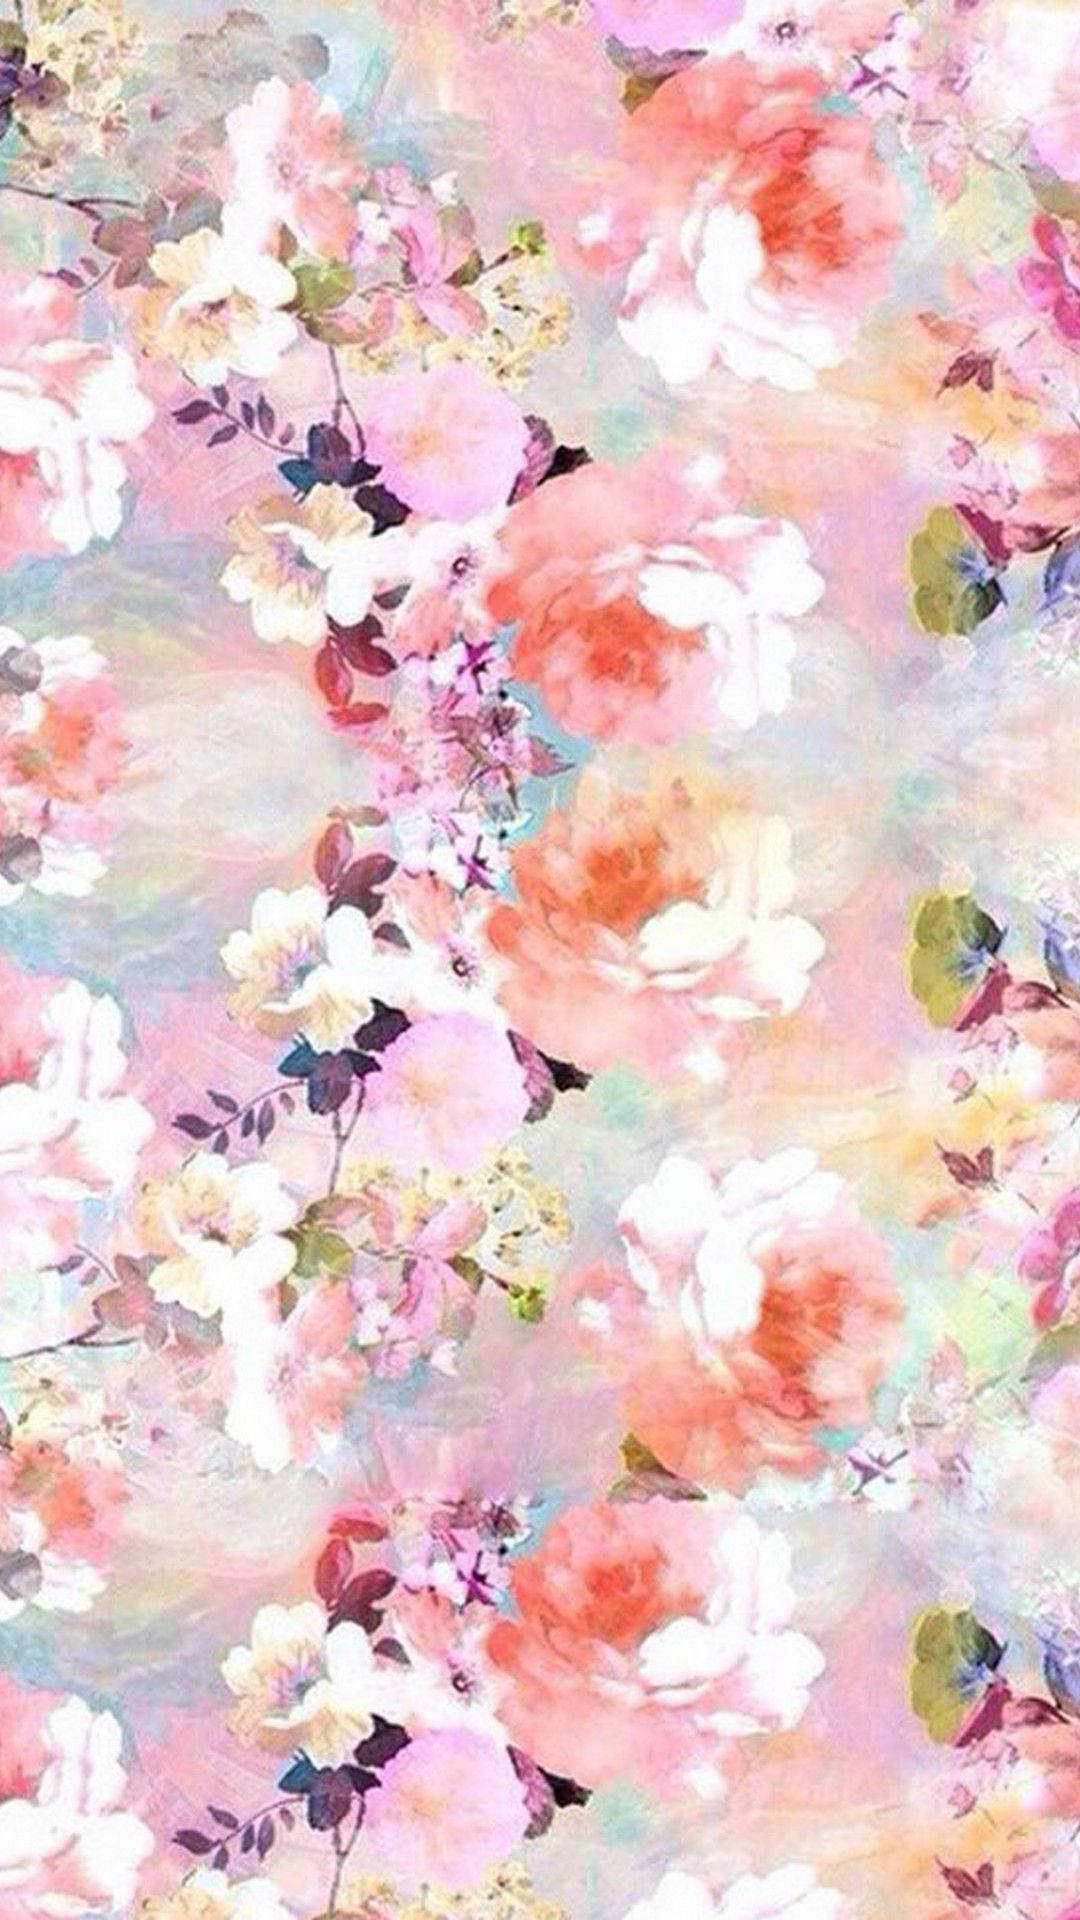 Saturated Floral Fantasy Lock Screen Background